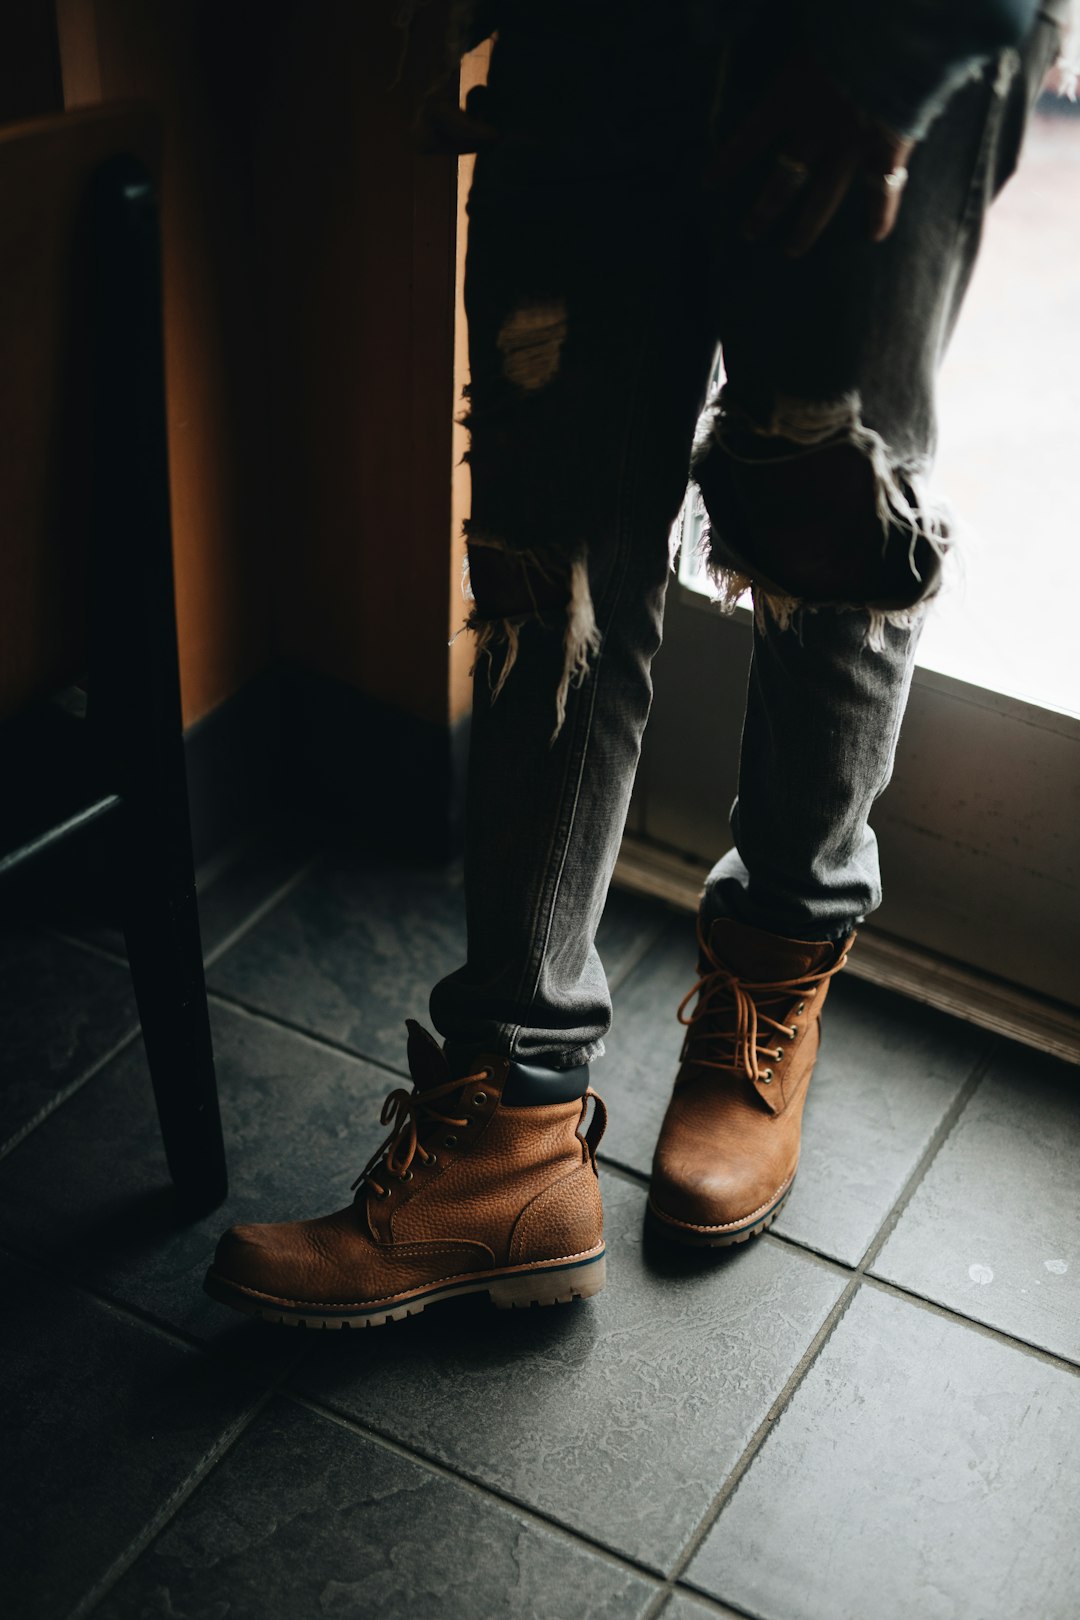 person wearing distressed blue denim jeans and pair of brown leather work boots beside glass door